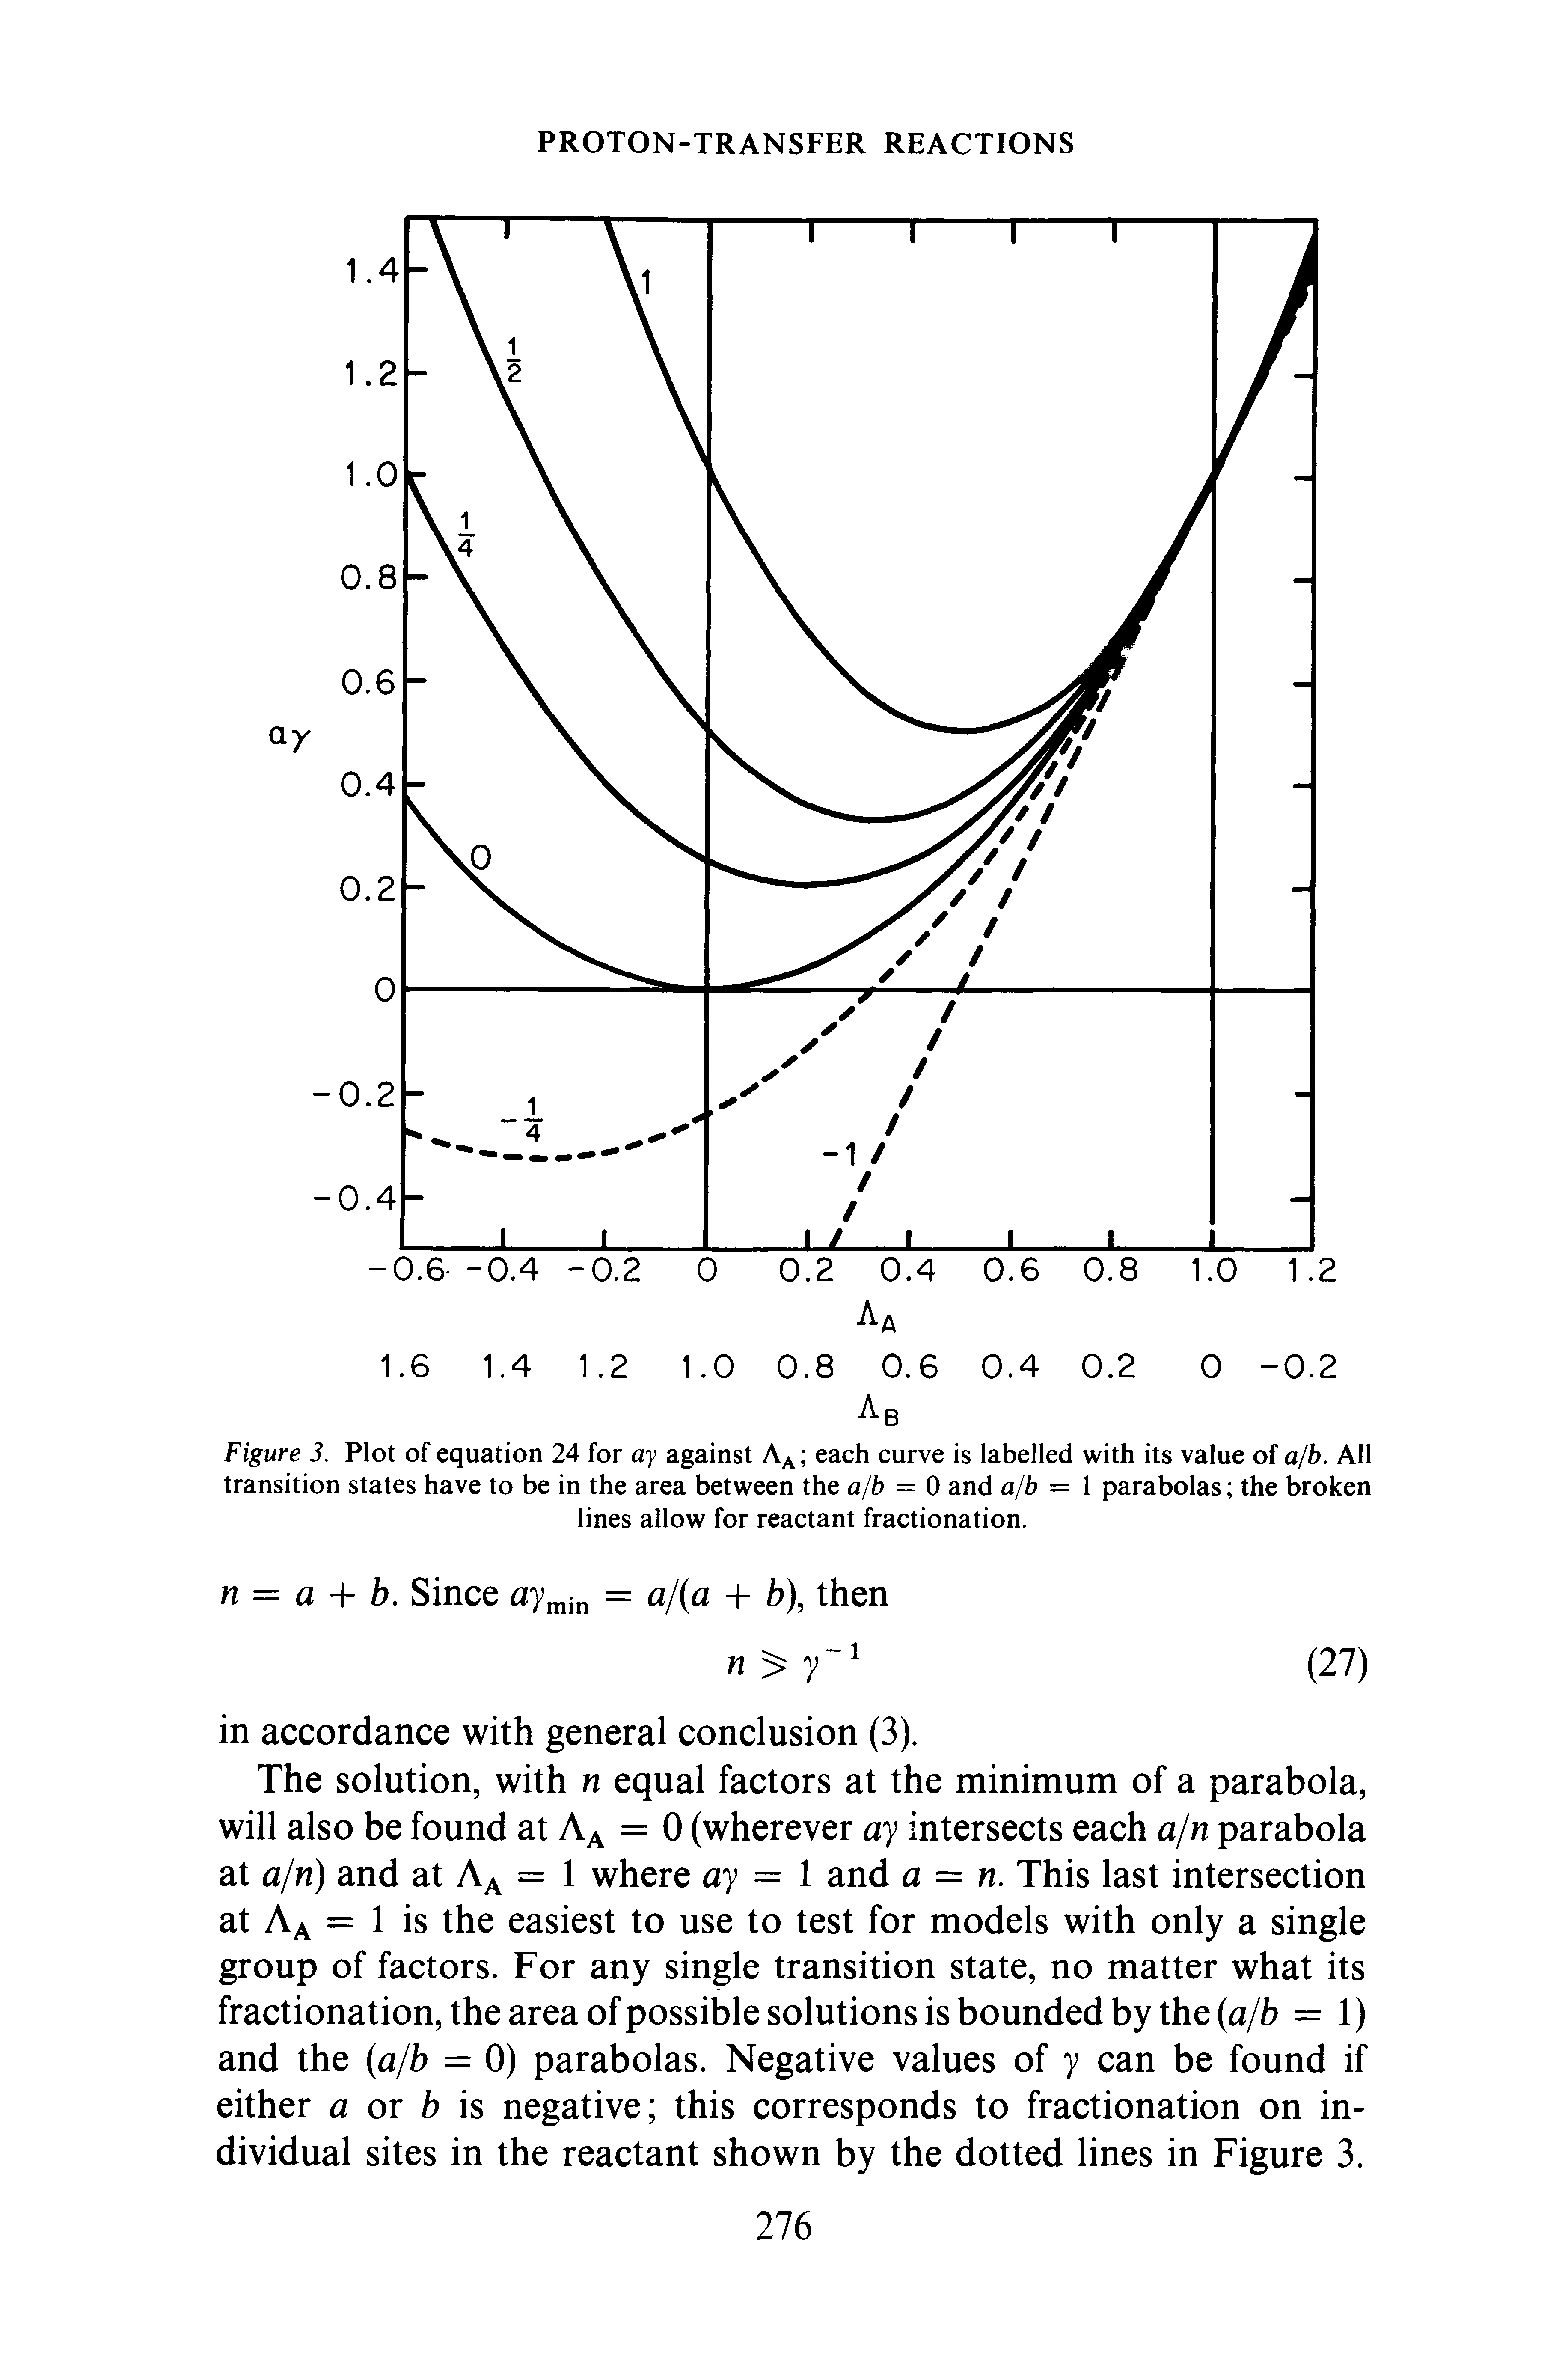 Figure 3. Plot of equation 24 for ay against A each curve is labelled with its value of alb. All transition states have to be in the area between the a/b = 0 and a/b = 1 parabolas the broken lines allow for reactant fractionation.